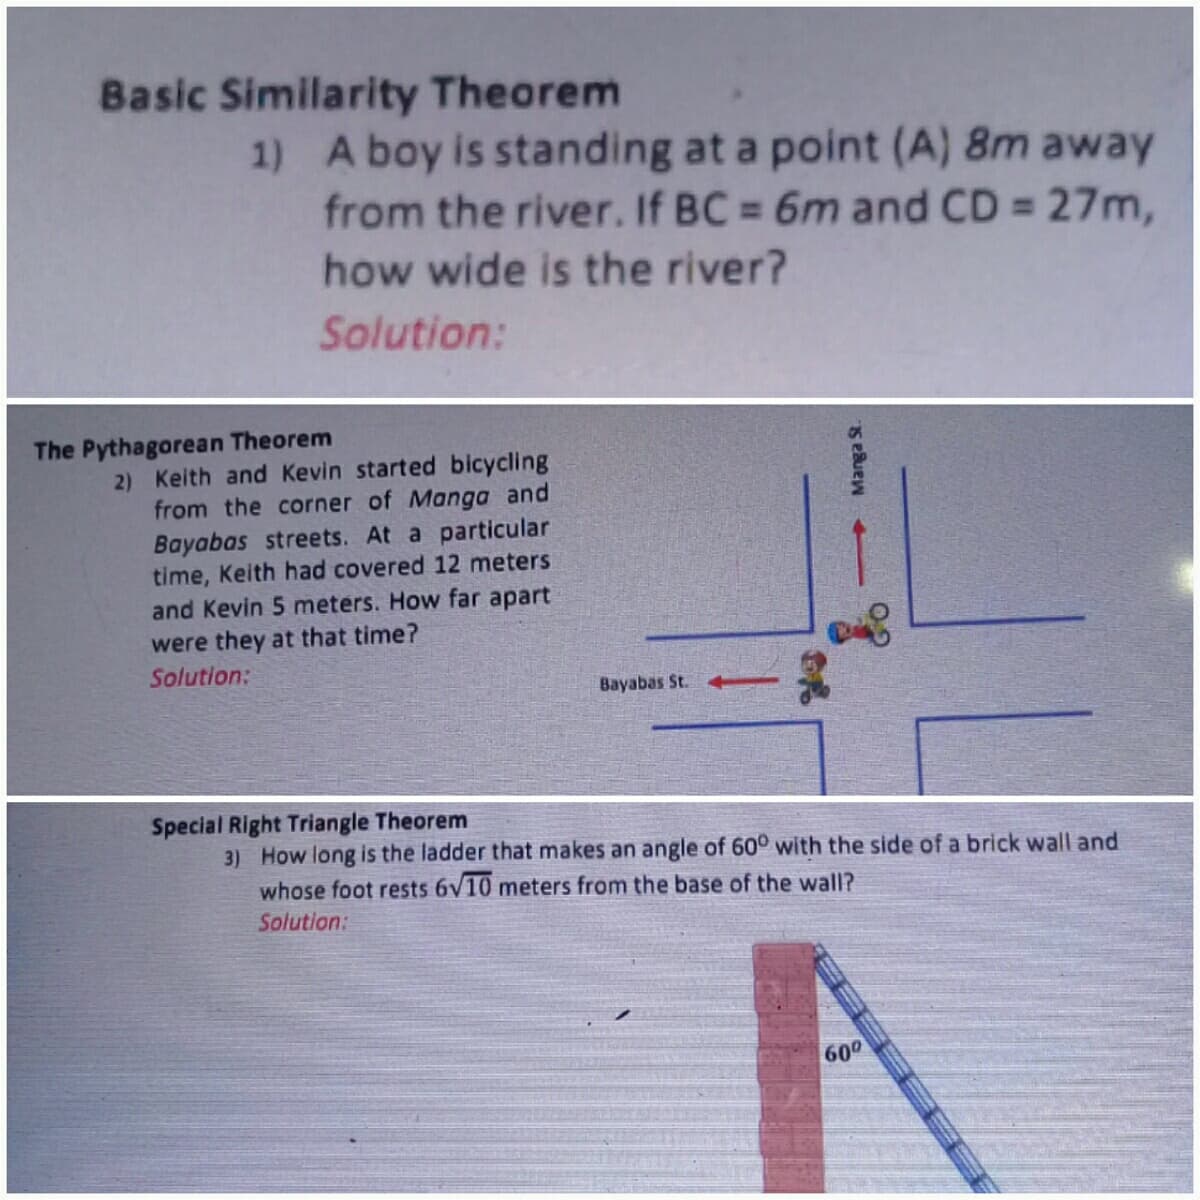 Basic Similarity Theorem
1) A boy is standing at a point (A) 8m away
from the river. If BC = 6m and CD = 27m,
%3D
how wide is the river?
Solution:
The Pythagorean Theorem
2) Keith and Kevin started bicycling
from the corner of Manga and
Bayabas streets. At a particular
time, Keith had covered 12 meters
and Kevin 5 meters. How far apart
were they at that time?
Solution:
Bayabas St.
Special Right Triangle Theorem
3) How long is the ladder that makes an angle of 60° with the side of a brick wall and
whose foot rests 6V10 meters from the base of the wall?
Solution:
600
→ Manga St.
